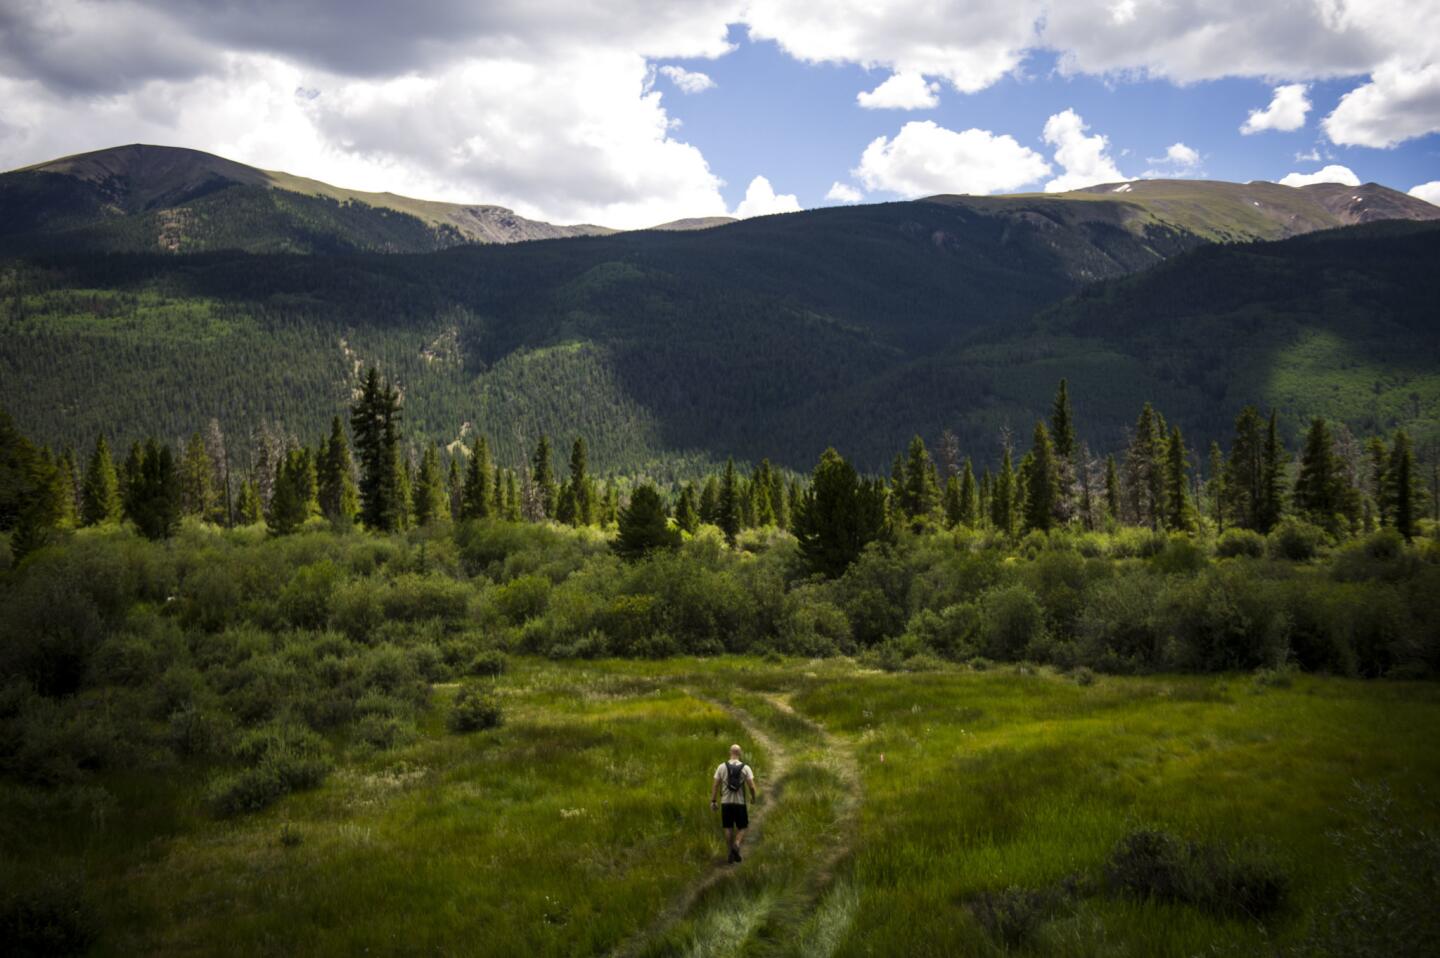 The Leadville Trail 100-mile run in the Colorado Rockies is an icon on the ultra-marathon circuit, a run so epic that founder Ken Chlouber, a 14-time finisher, started a separate marathon for those who wanted the challenge without the distance. The latter race is an out-and-back "run" up to Mosquito Pass at 13,185 feet, but you must expect to walk because the rocks up there are tricky. "If you are going to have a grueling, tough, leg-busting, lung-busting race, it's this one," says Chlouber, 79. Race registration costs $115, a half-marathon the same day is $100.